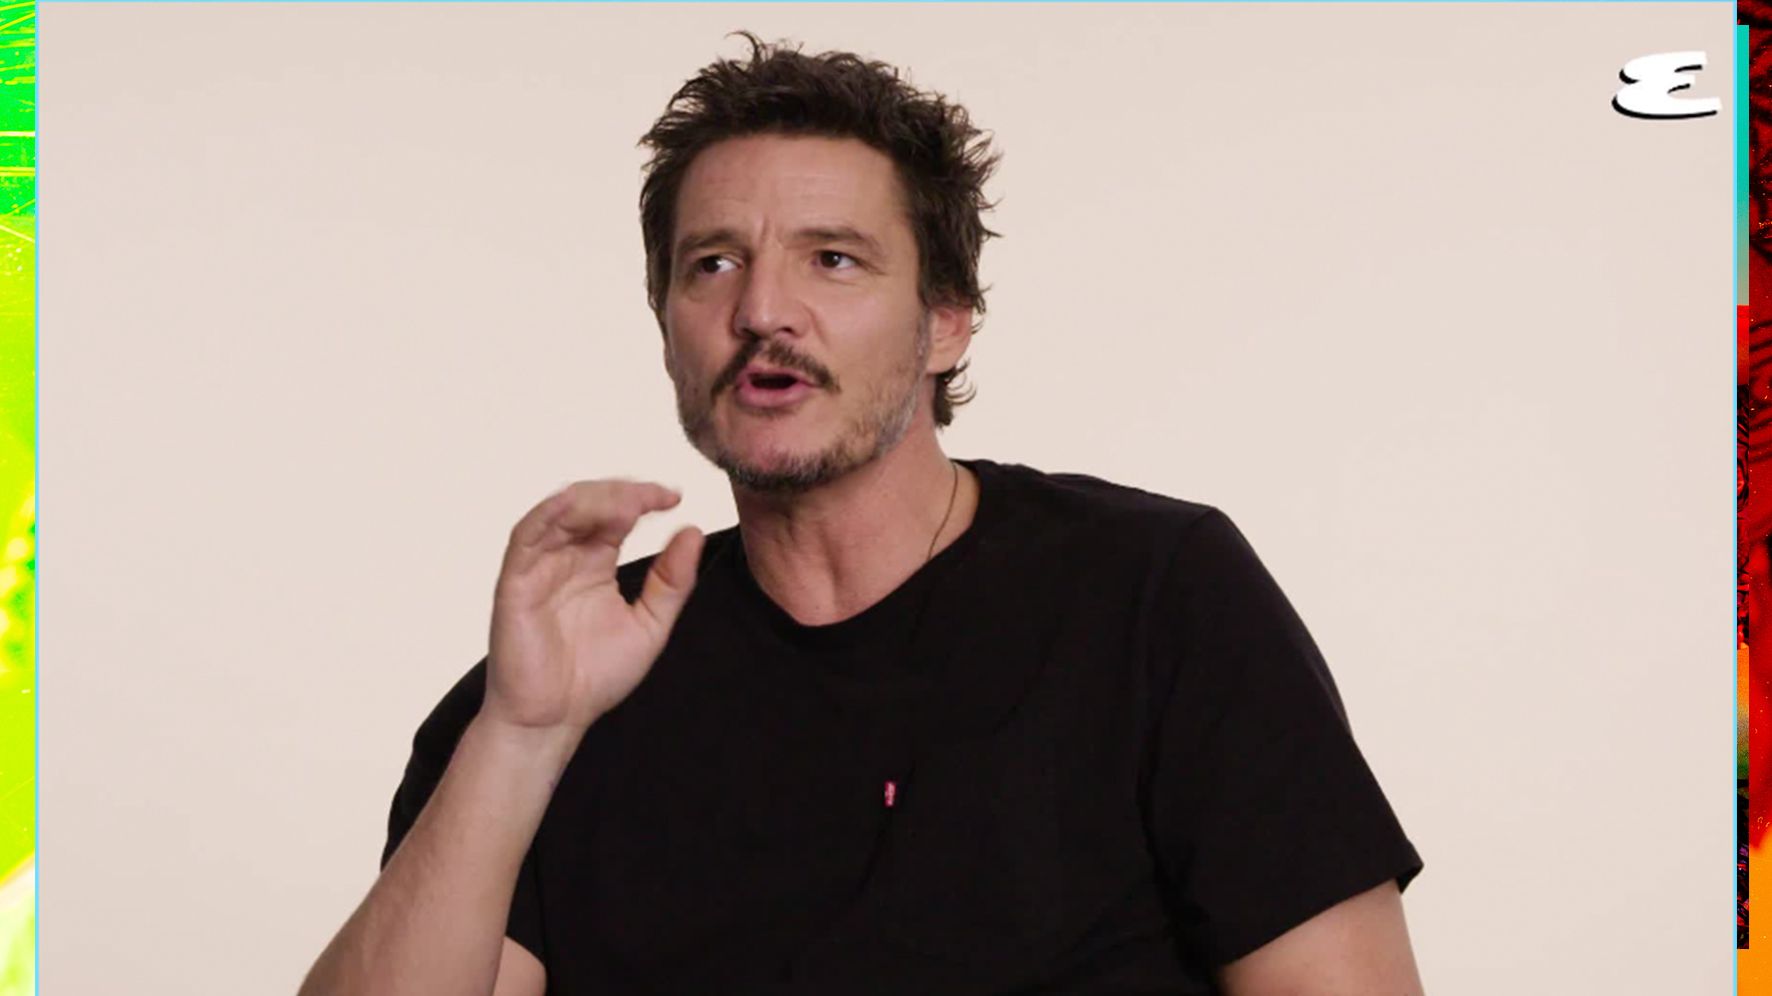 Pedro Pascal Nation on X: NEW: IMDb shared a short clip from an interview  done at D23 this year with the cast of the Mandalorian regarding season 3!  Here is the link